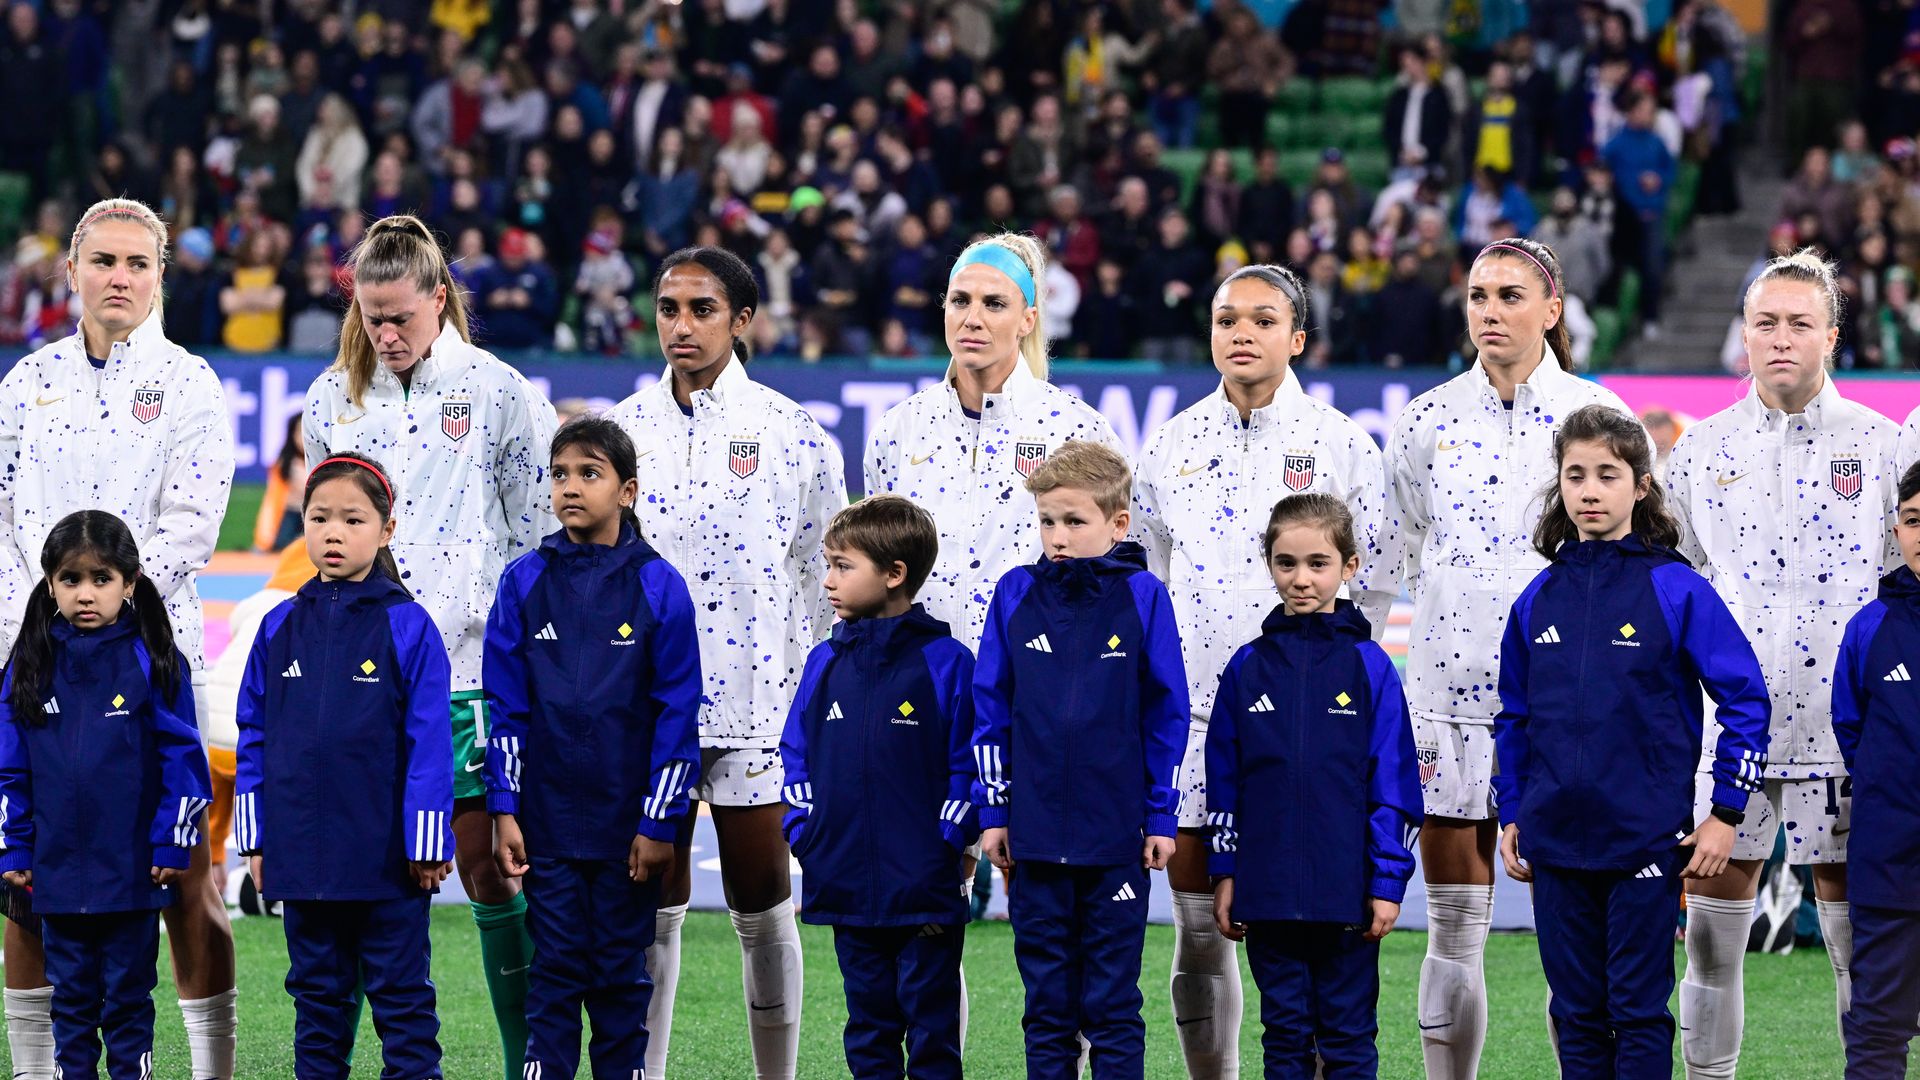 U.S. women's national team players in white warmup jackets stand on the field behind kids in blue track suits at the 2023 FIFA Women's World Cup.